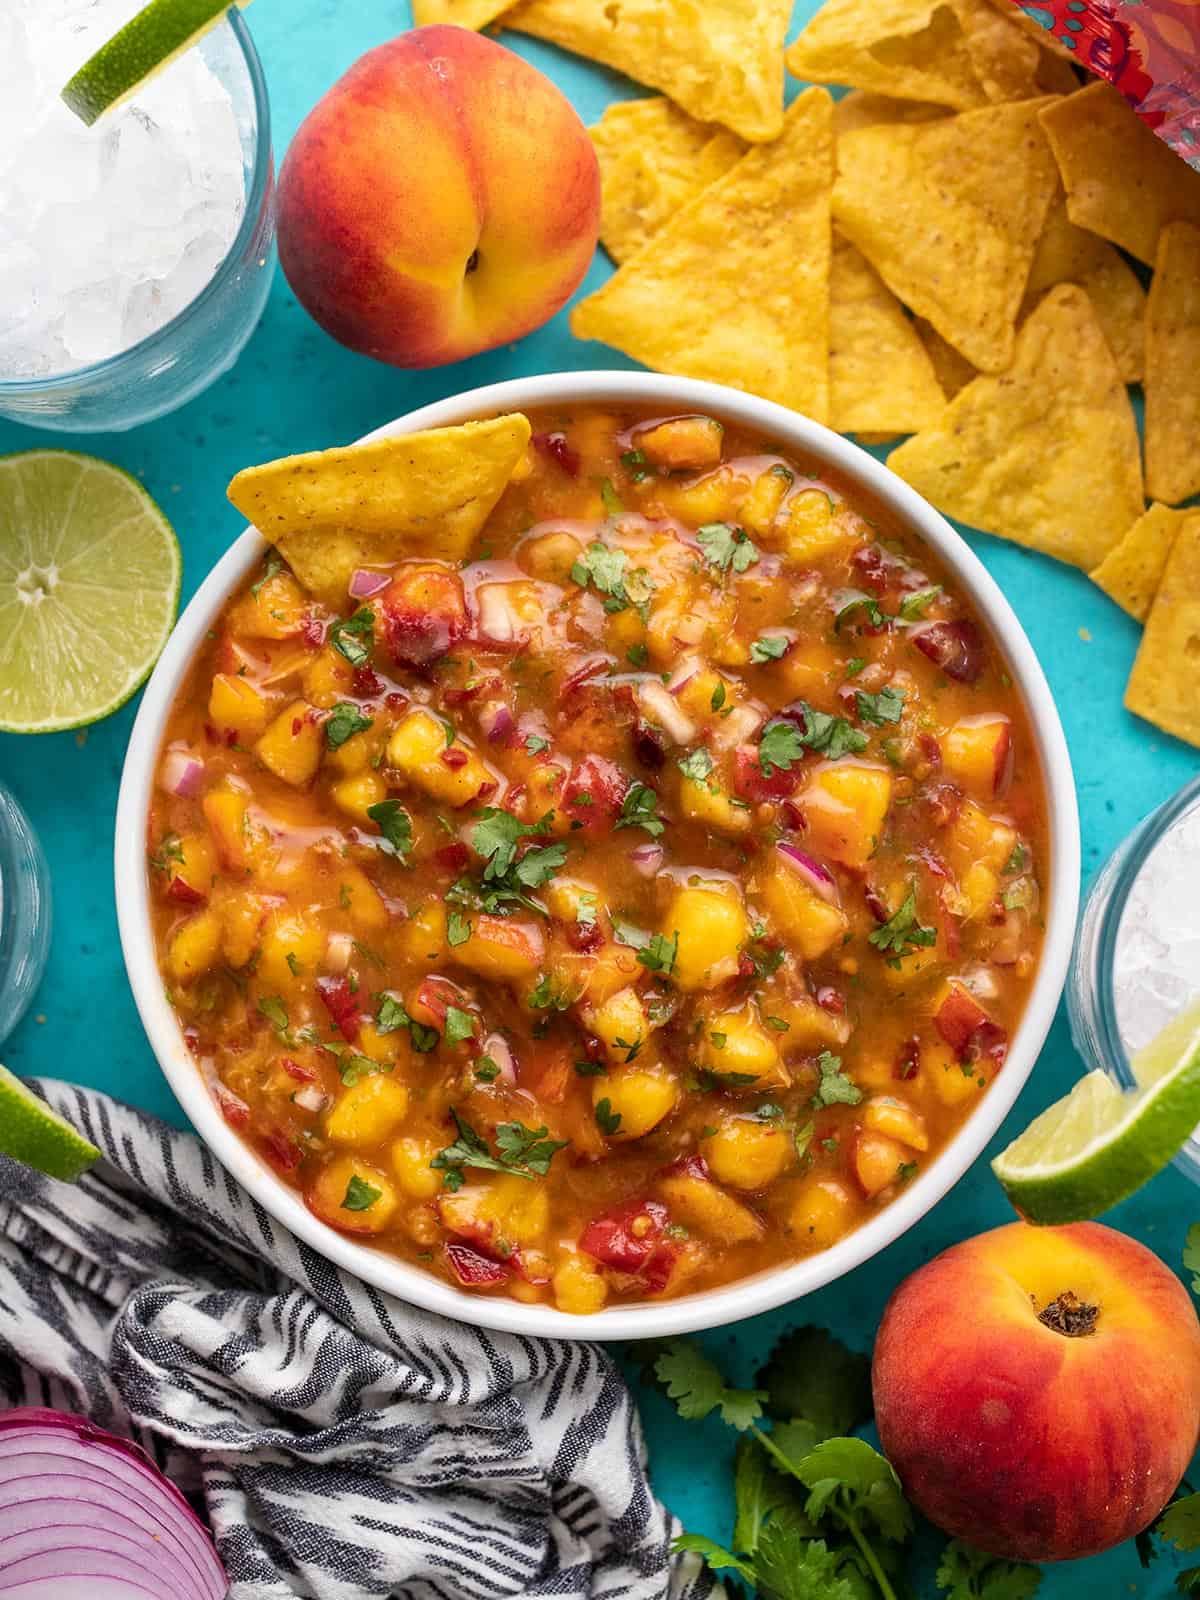 Overhead view of a bowl full of chipotle peach salsa with chips.